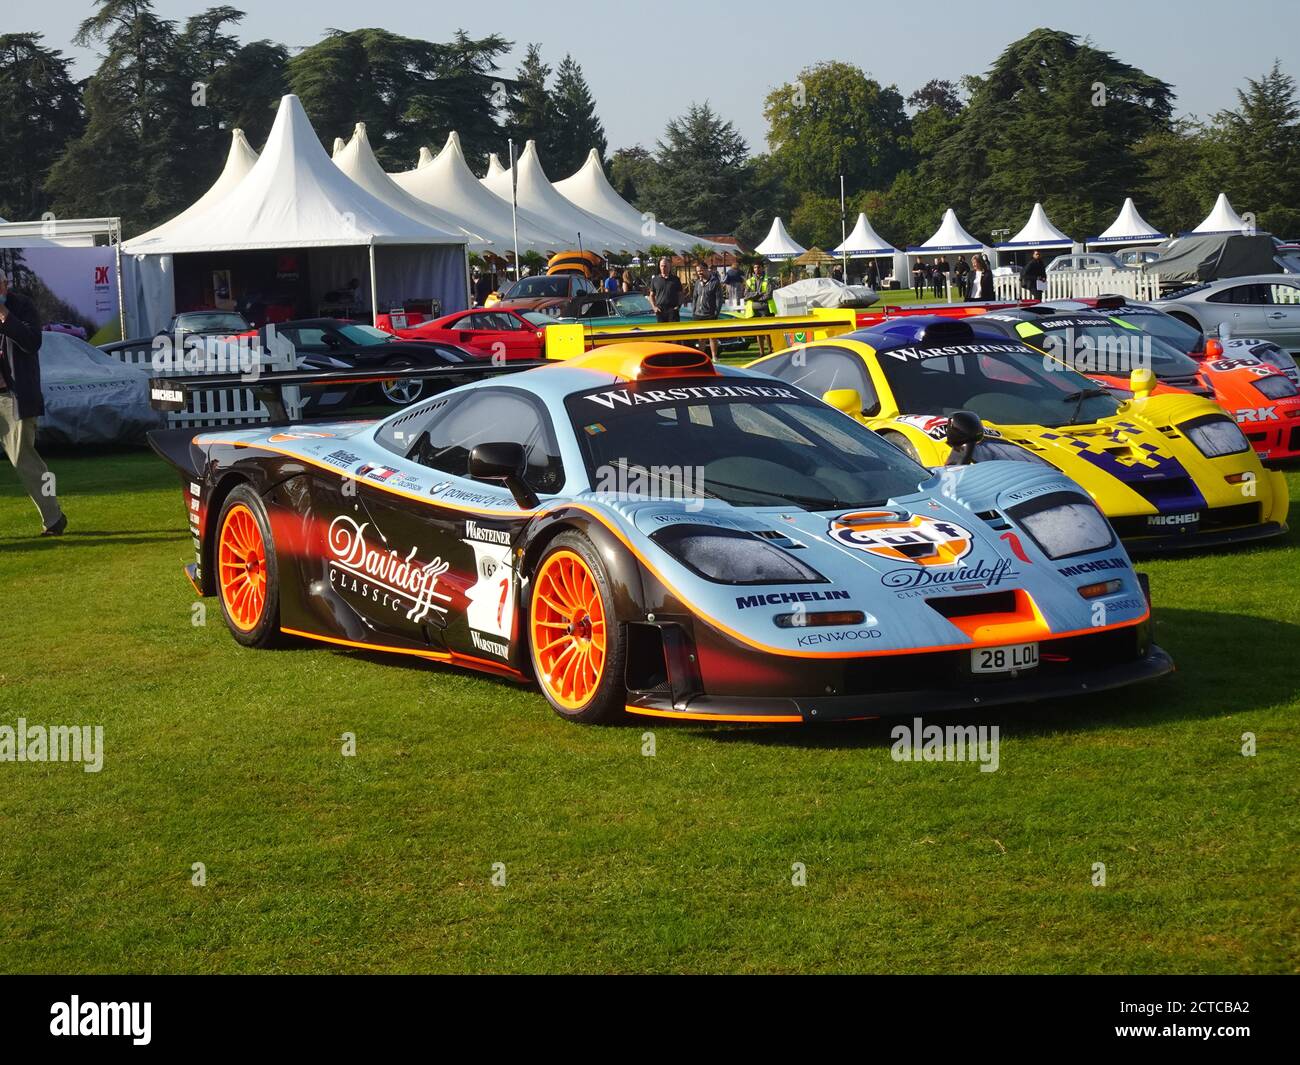 Blenheim Palace, Oxford, UK. 22nd Sep, 2020. GT supercars pose on the lawns At the famous Salon Prive held at Blenheim Palace Credit: Motofoto/Alamy Live News Stock Photo